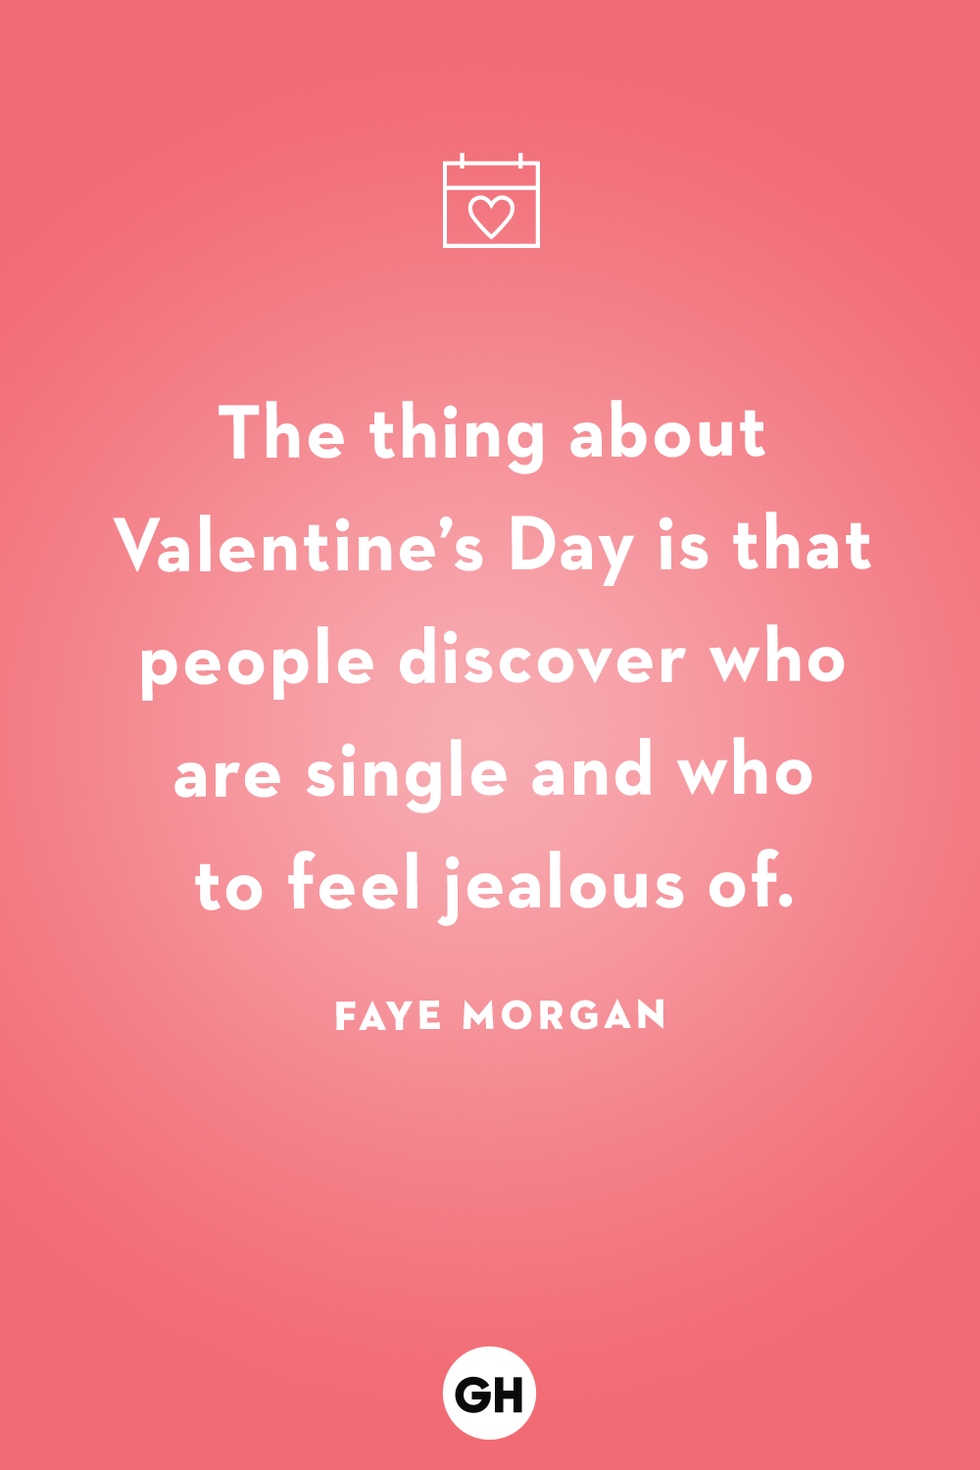 the thing about valentine's day is that people discover who are single and who to feel jealous of faye morgan